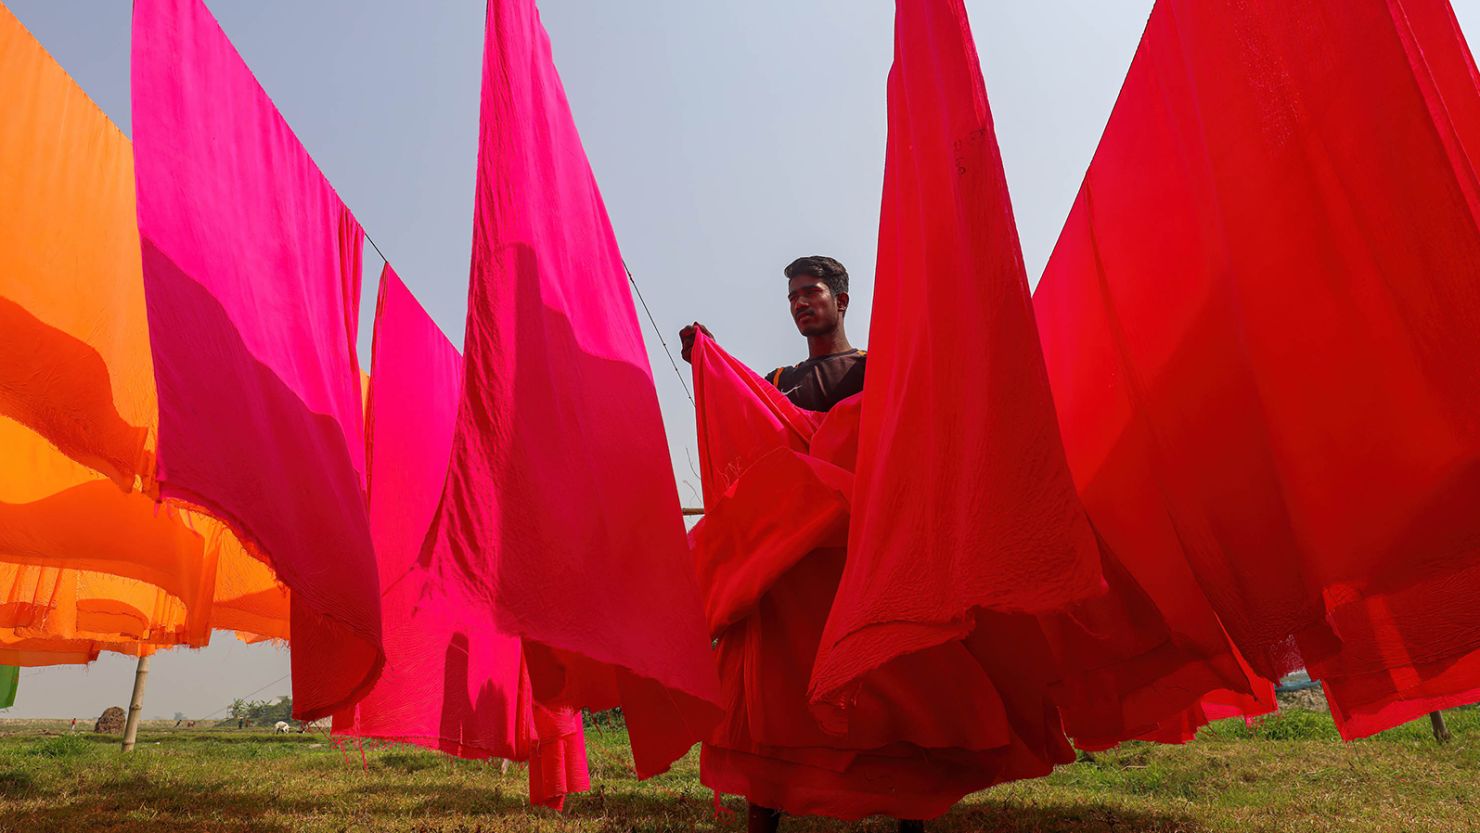 A worker collects dyed fabric after drying it under the sun at a dyeing factory in Bangladesh.